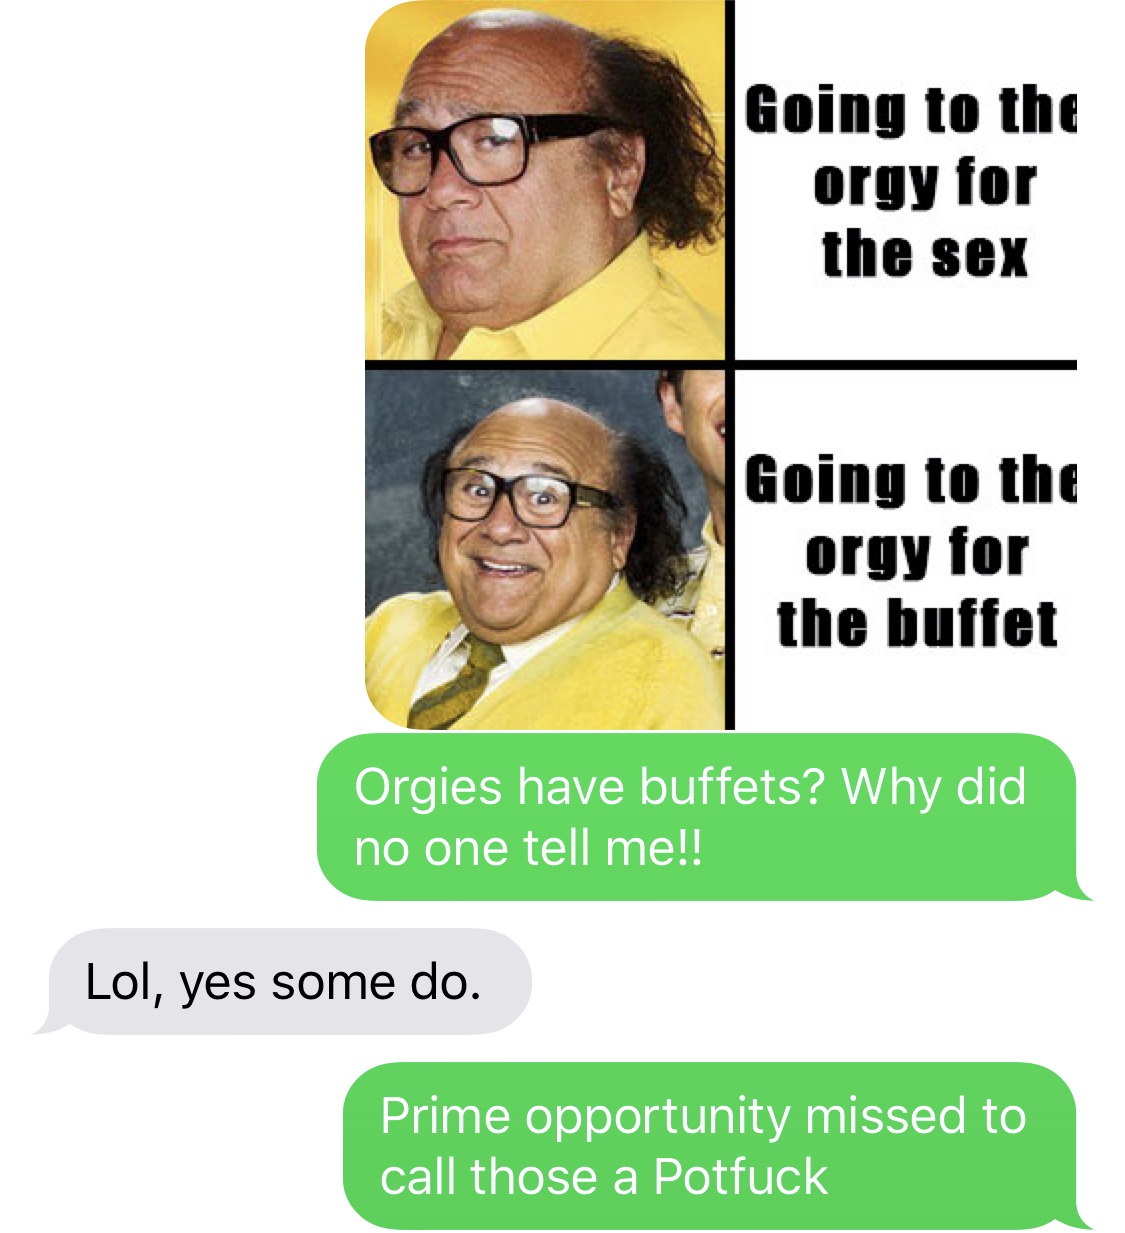 human behavior - Going to the orgy for the sex Going to the orgy for the buffet Orgies have buffets? Why did no one tell me!! Lol, yes some do. Prime opportunity missed to call those a Potfuck